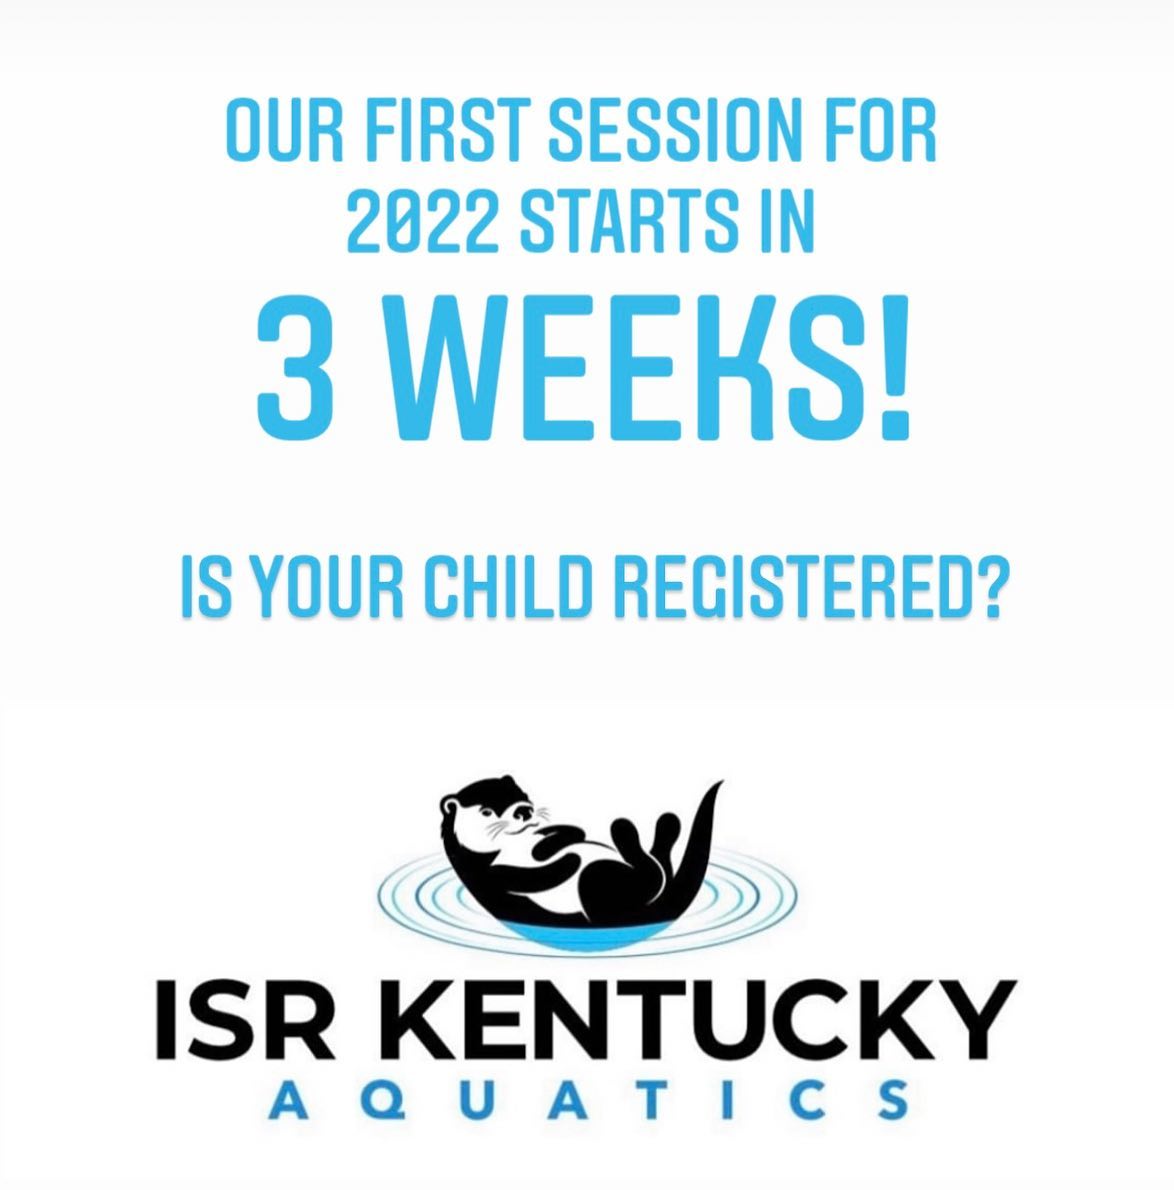 Our first session for 2022 starts in 3 WEEKS! Is your child registered?

NOW is the best perfect time to get your child ready for spring break and summer swimming. Don’t wait and put off these life saving lessons until later in the spring. Sessions fill quickly and your preferred time slot might now be available. 

New student spots for January 24
3:50 pm, 4:10 pm, 5:10 pm, 5:20 pm

Refresher spots for February 7 & 21
3:10 pm 
(Later evening time slots available upon request!)

More refresher spots will become available March 14th—time slots TBA. 

Book today. See link in bio!